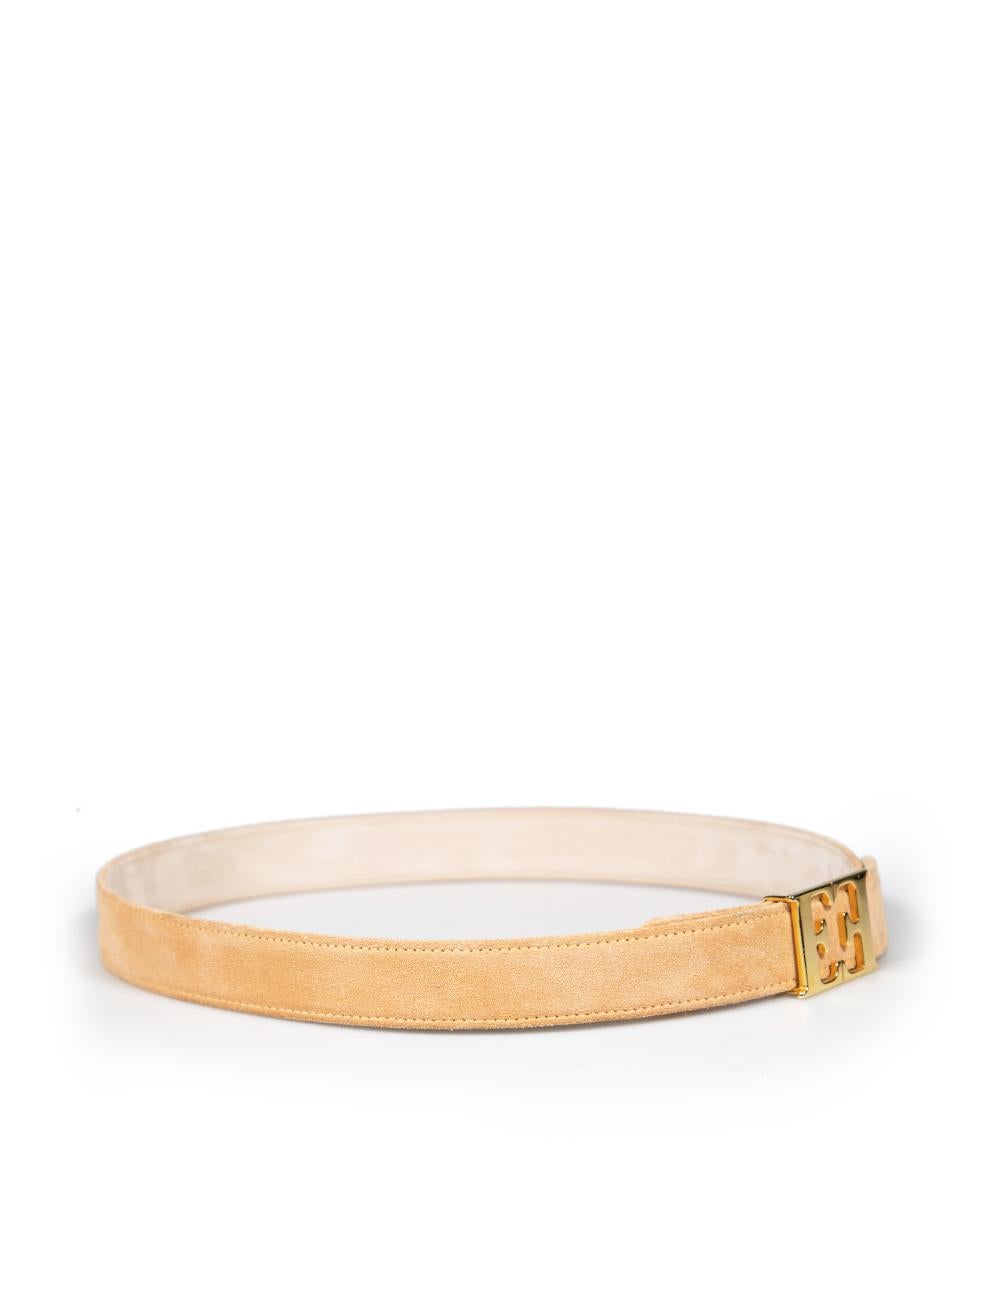 CONDITION is Very good. Minimal wear to belt is evident. Minimal scratches and discolouration on the suede and inner leather on this used Escada designer resale item.
 
 
 
 Details
 
 
 Beige
 
 Suede
 
 Belt
 
 Gold logo buckle
 
 
 
 
 
 Made in